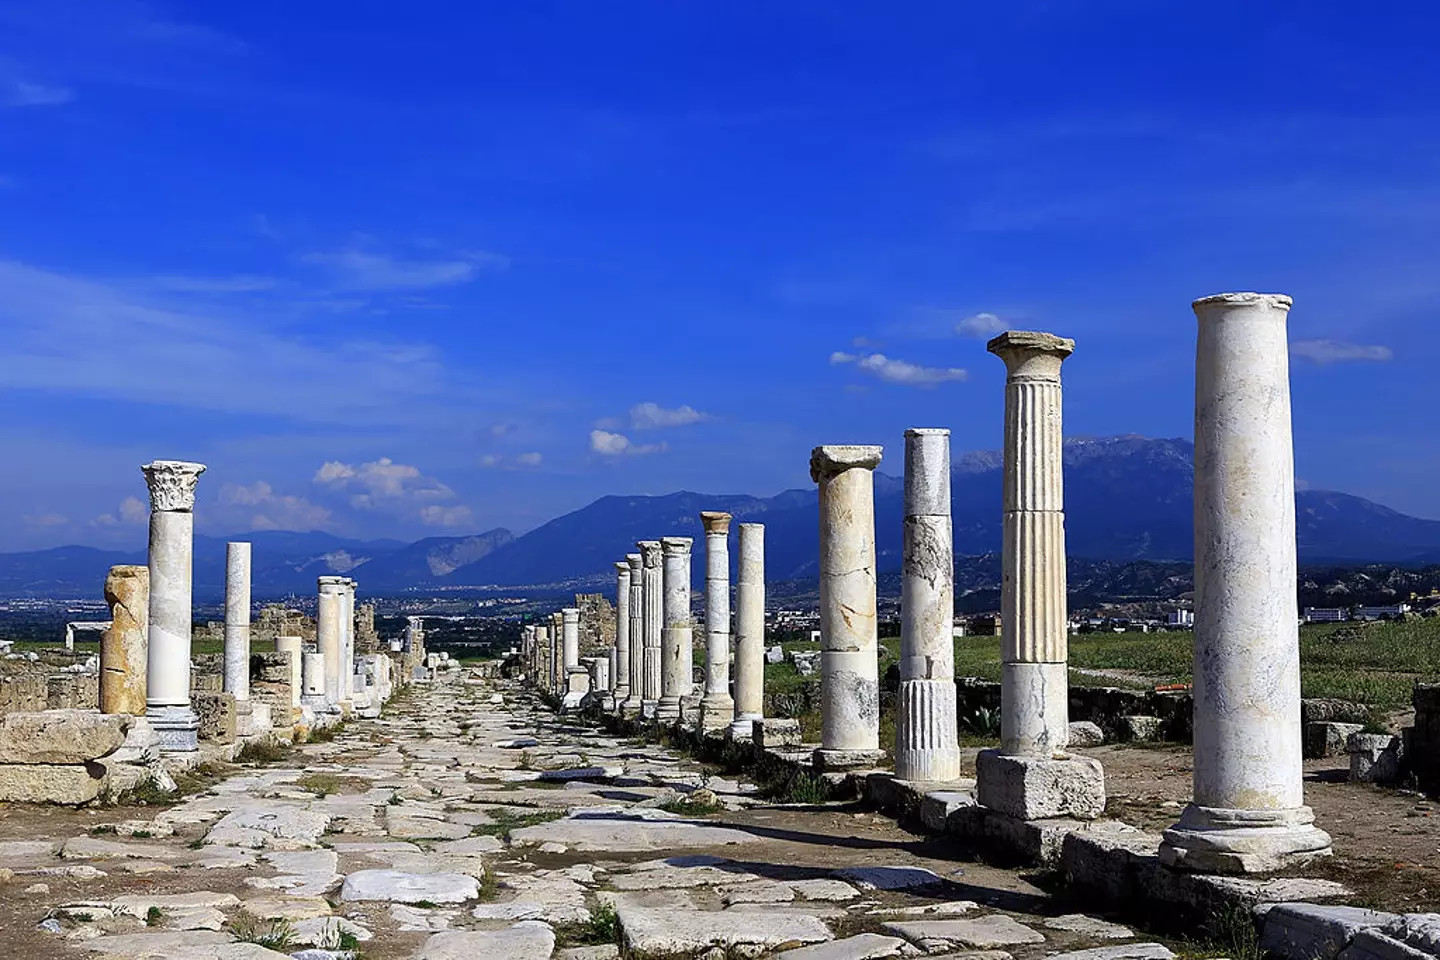 The discoveries were made in the ancient city of Laodicea on the Lycus (Ali Ihsan Ozturk/Anadolu Agency/Getty Images)